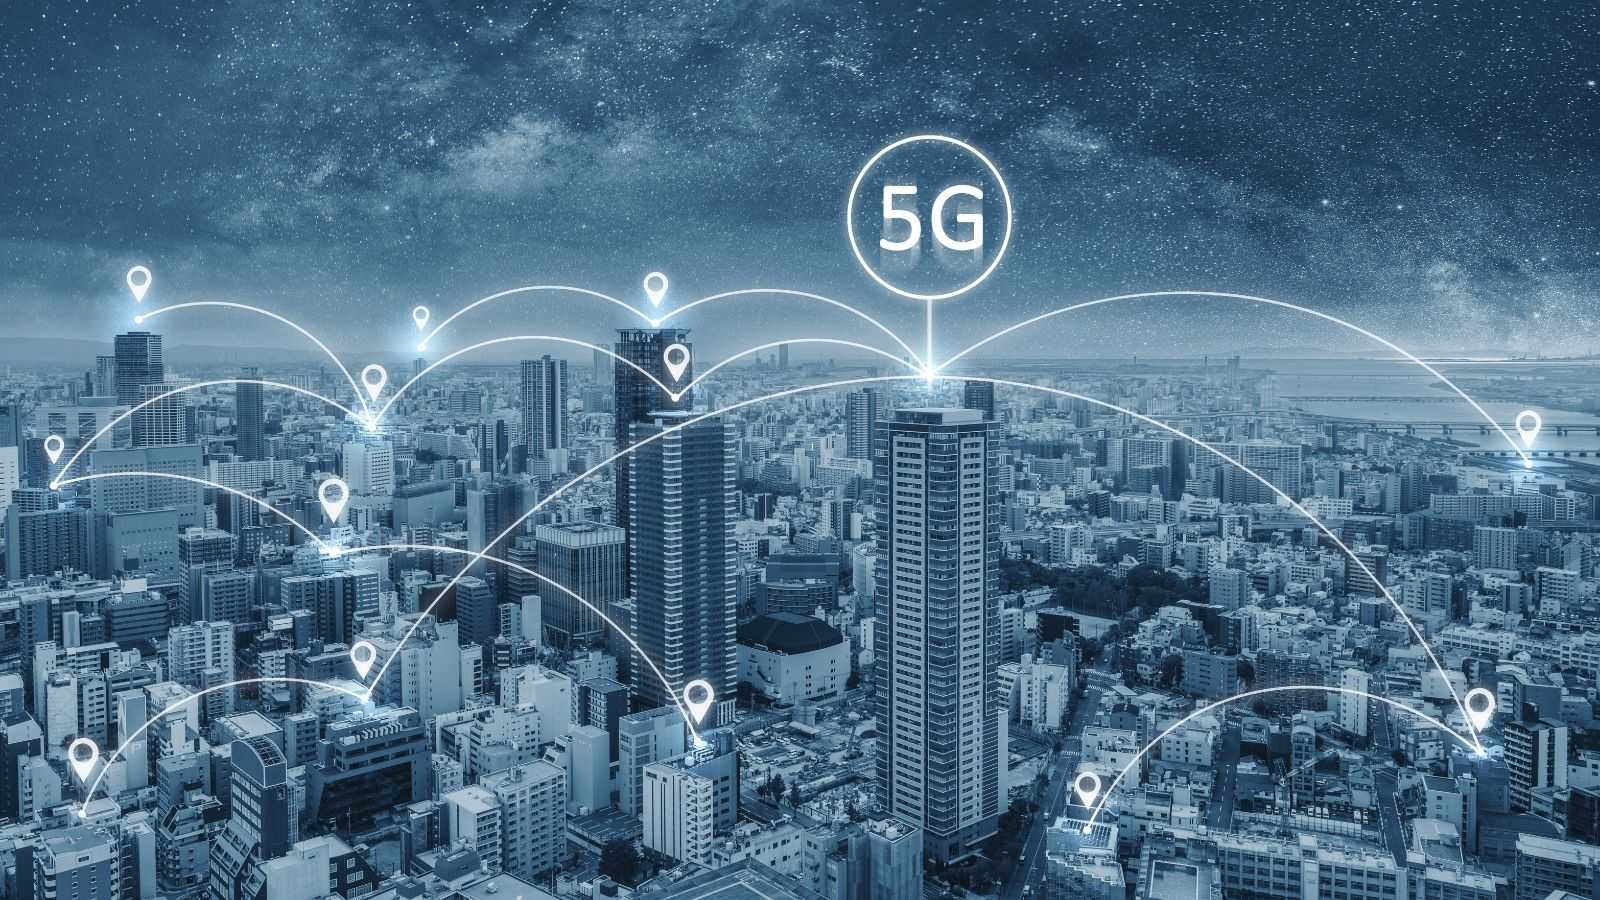 Points on the city map that are connected by the 5G network